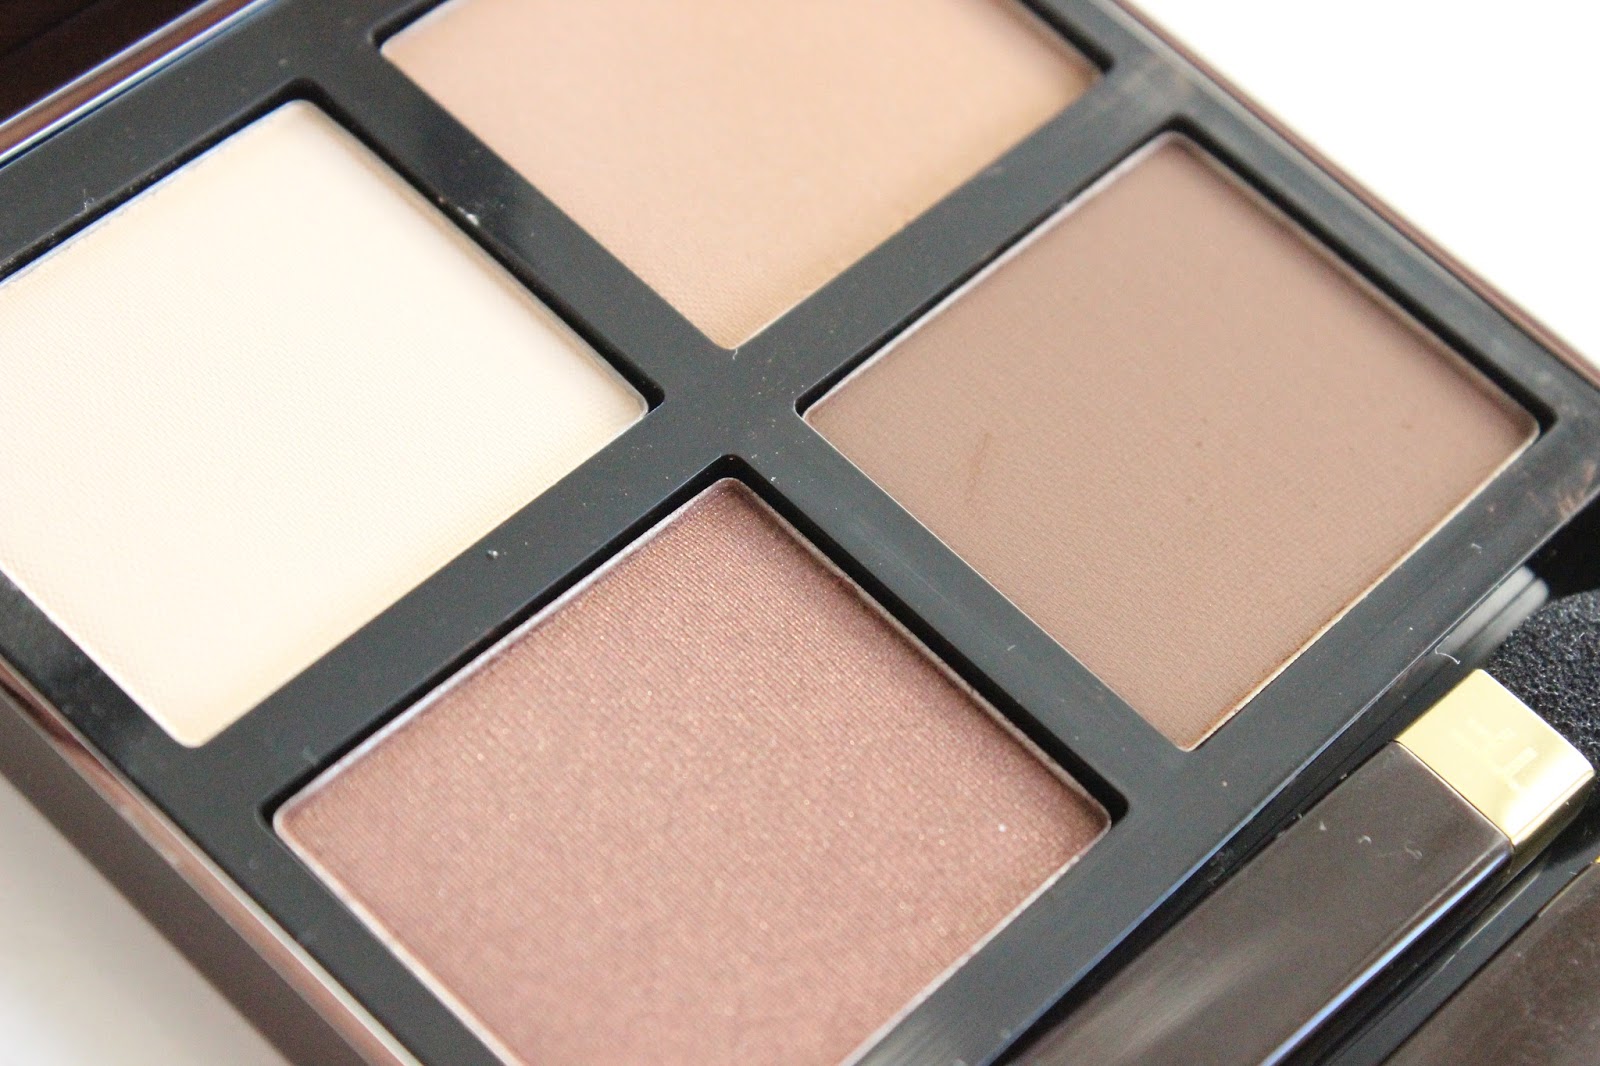 Tom Ford Eyeshadow Quad in Cocoa Mirage 